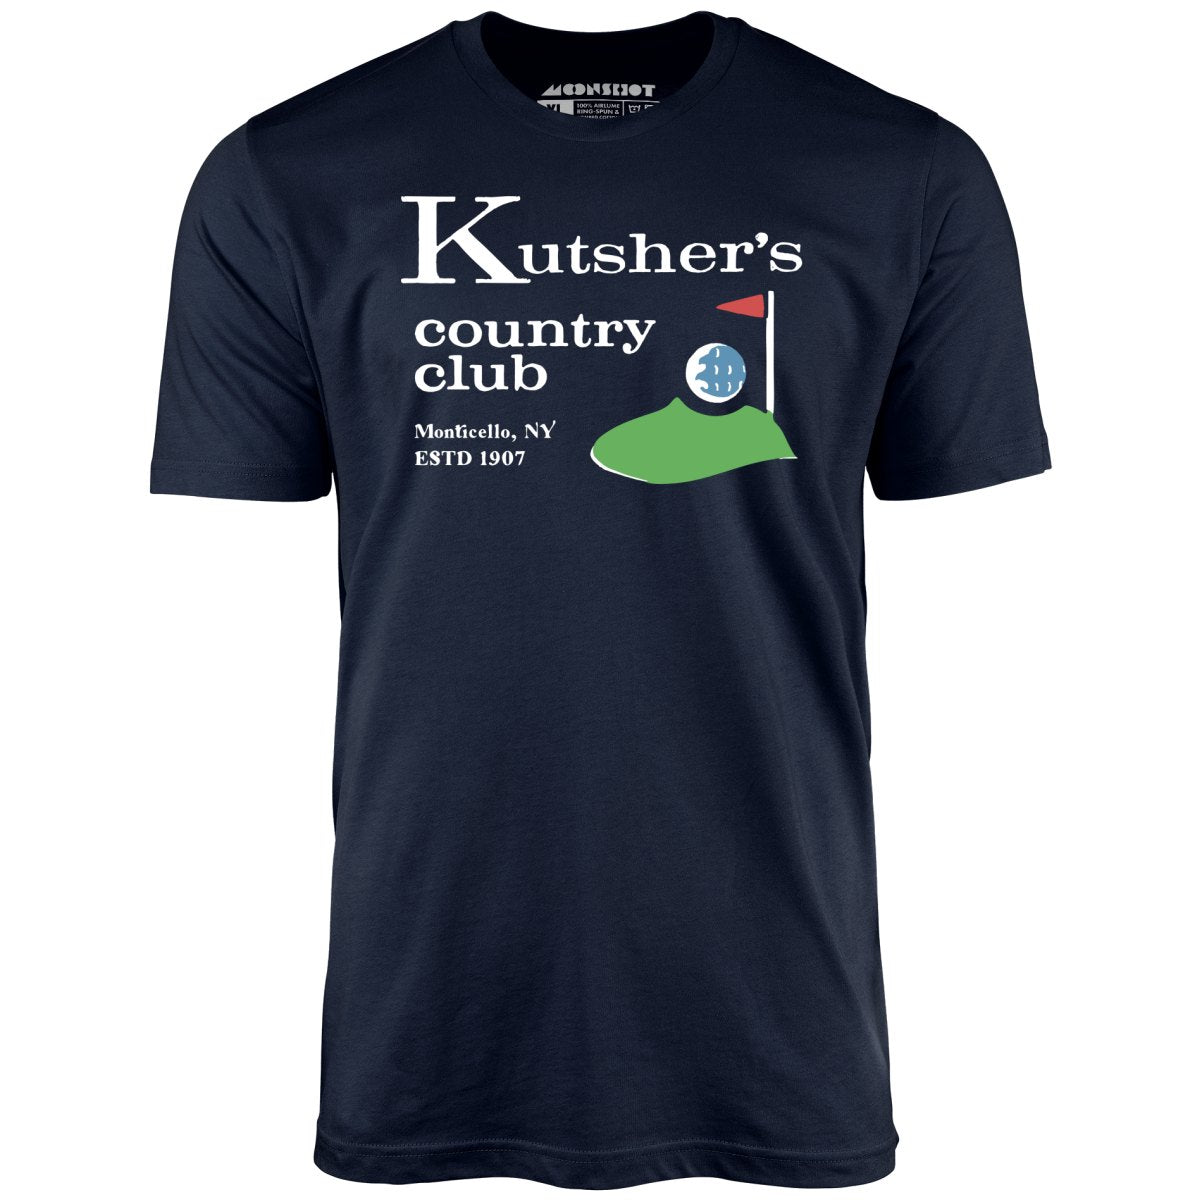 Kutsher's Country Club - Monticello, NY - Vintage Hotel - unisex T-Shirt Navy / 4XL